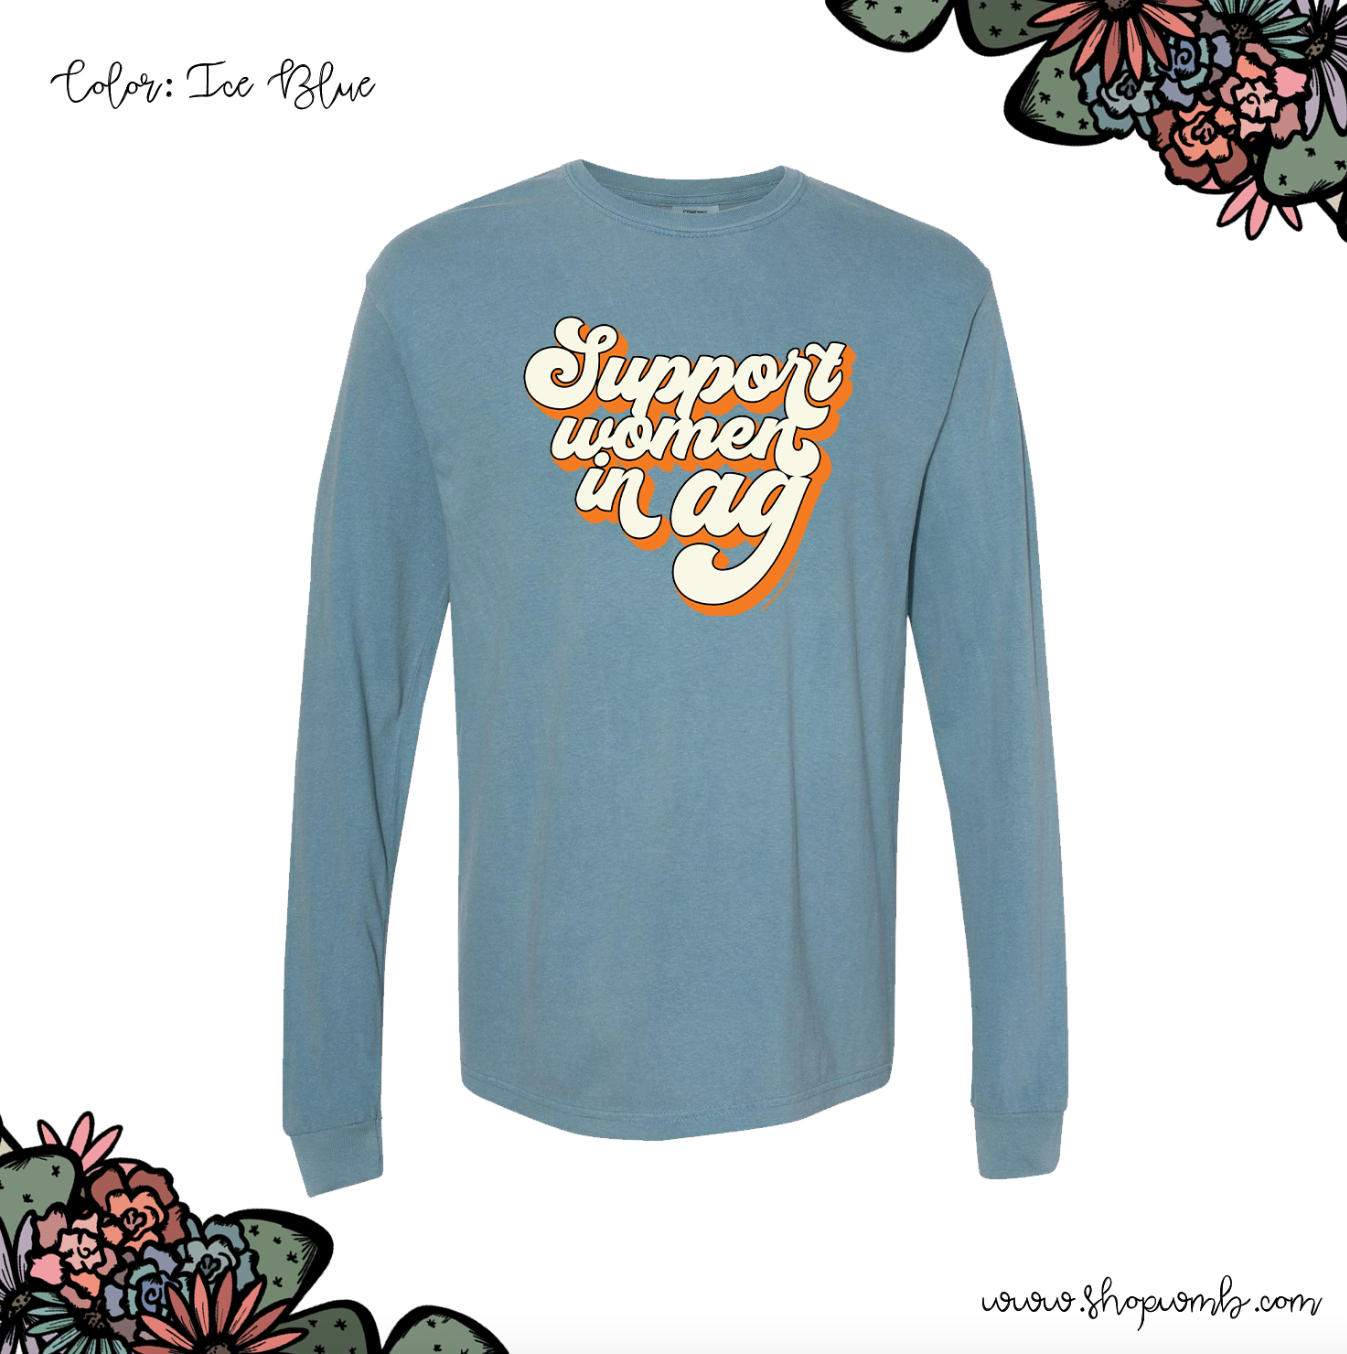 Retro Support Women In Ag Orange LONG SLEEVE T-Shirt (S-3XL) - Multiple Colors!